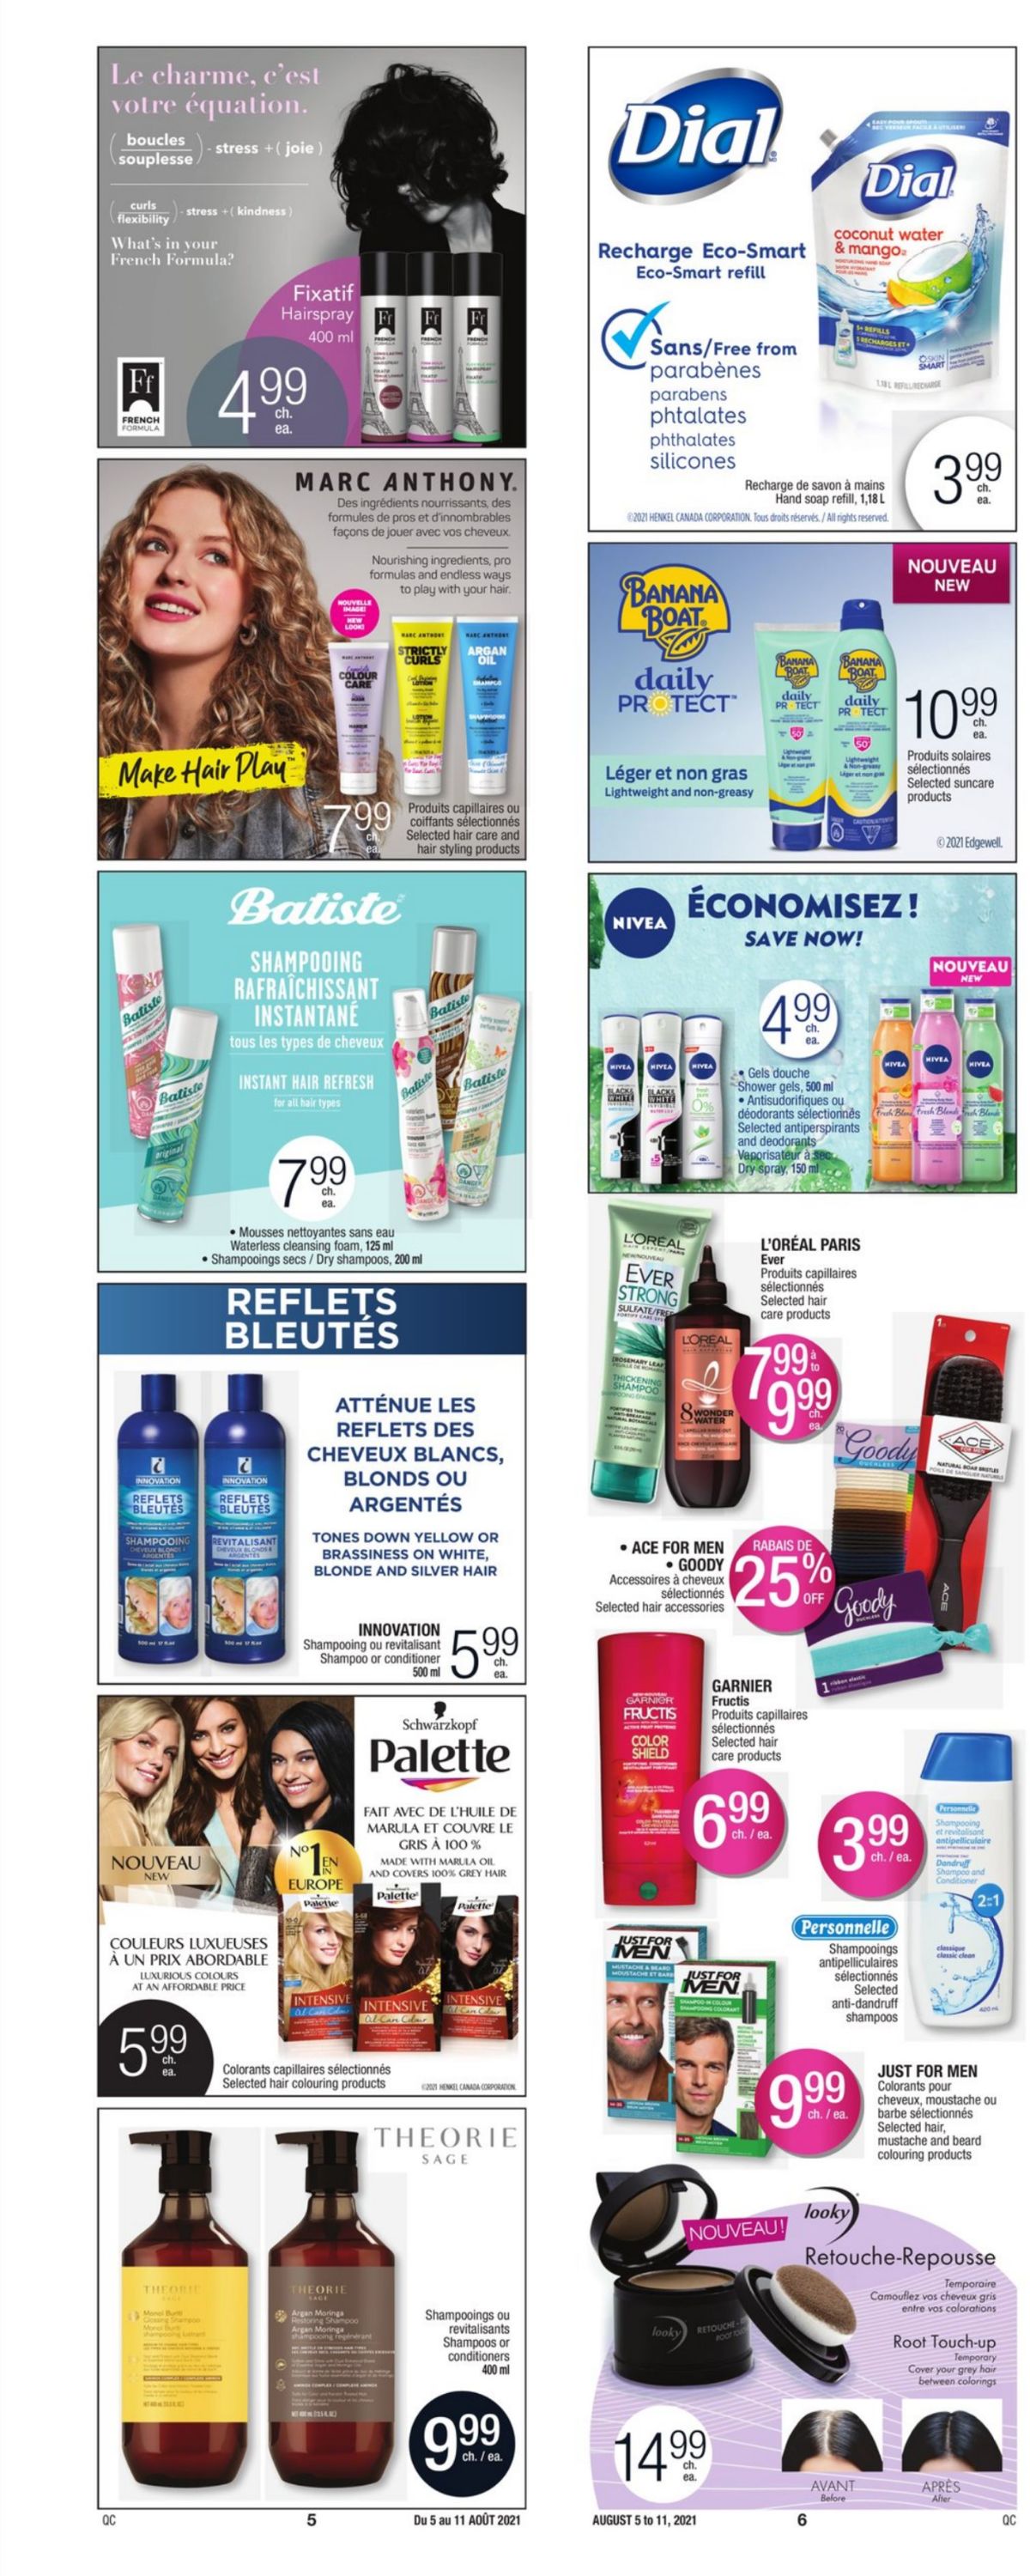 Jean Coutu Flyer from 08/05/2021